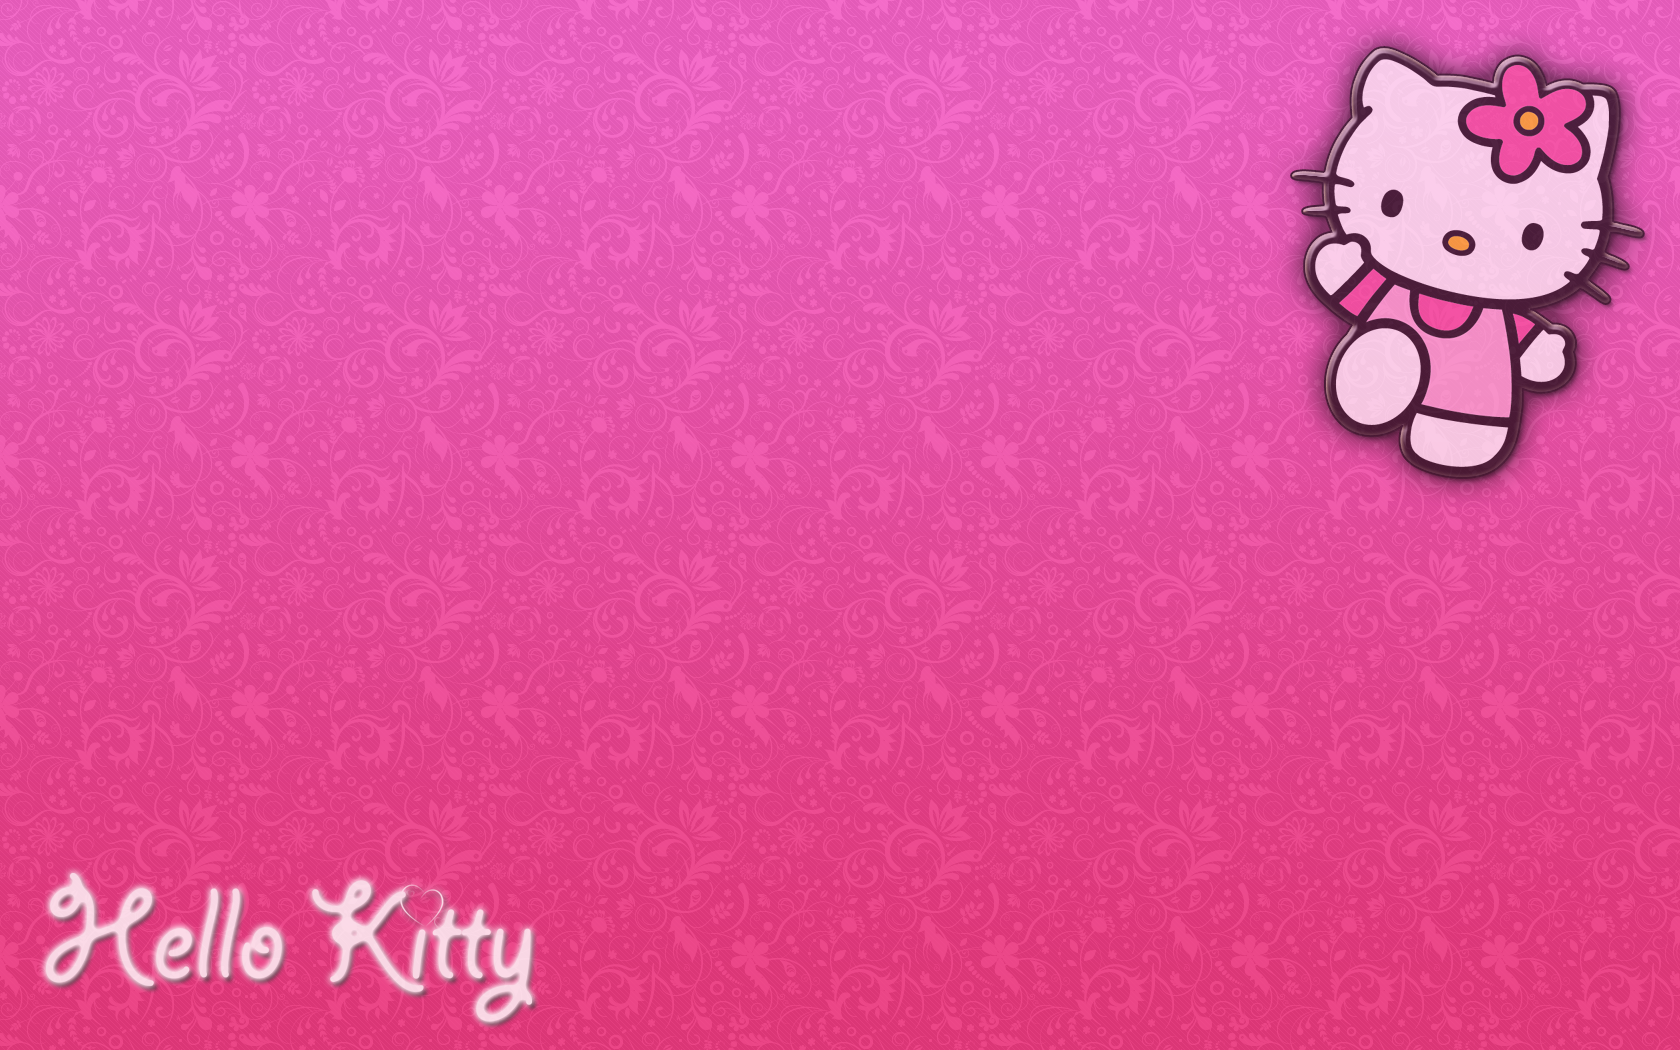 Hello Kitty Wallpaper Pink And Black Love Hello Kitty Wallpaper Pink 1680x1050